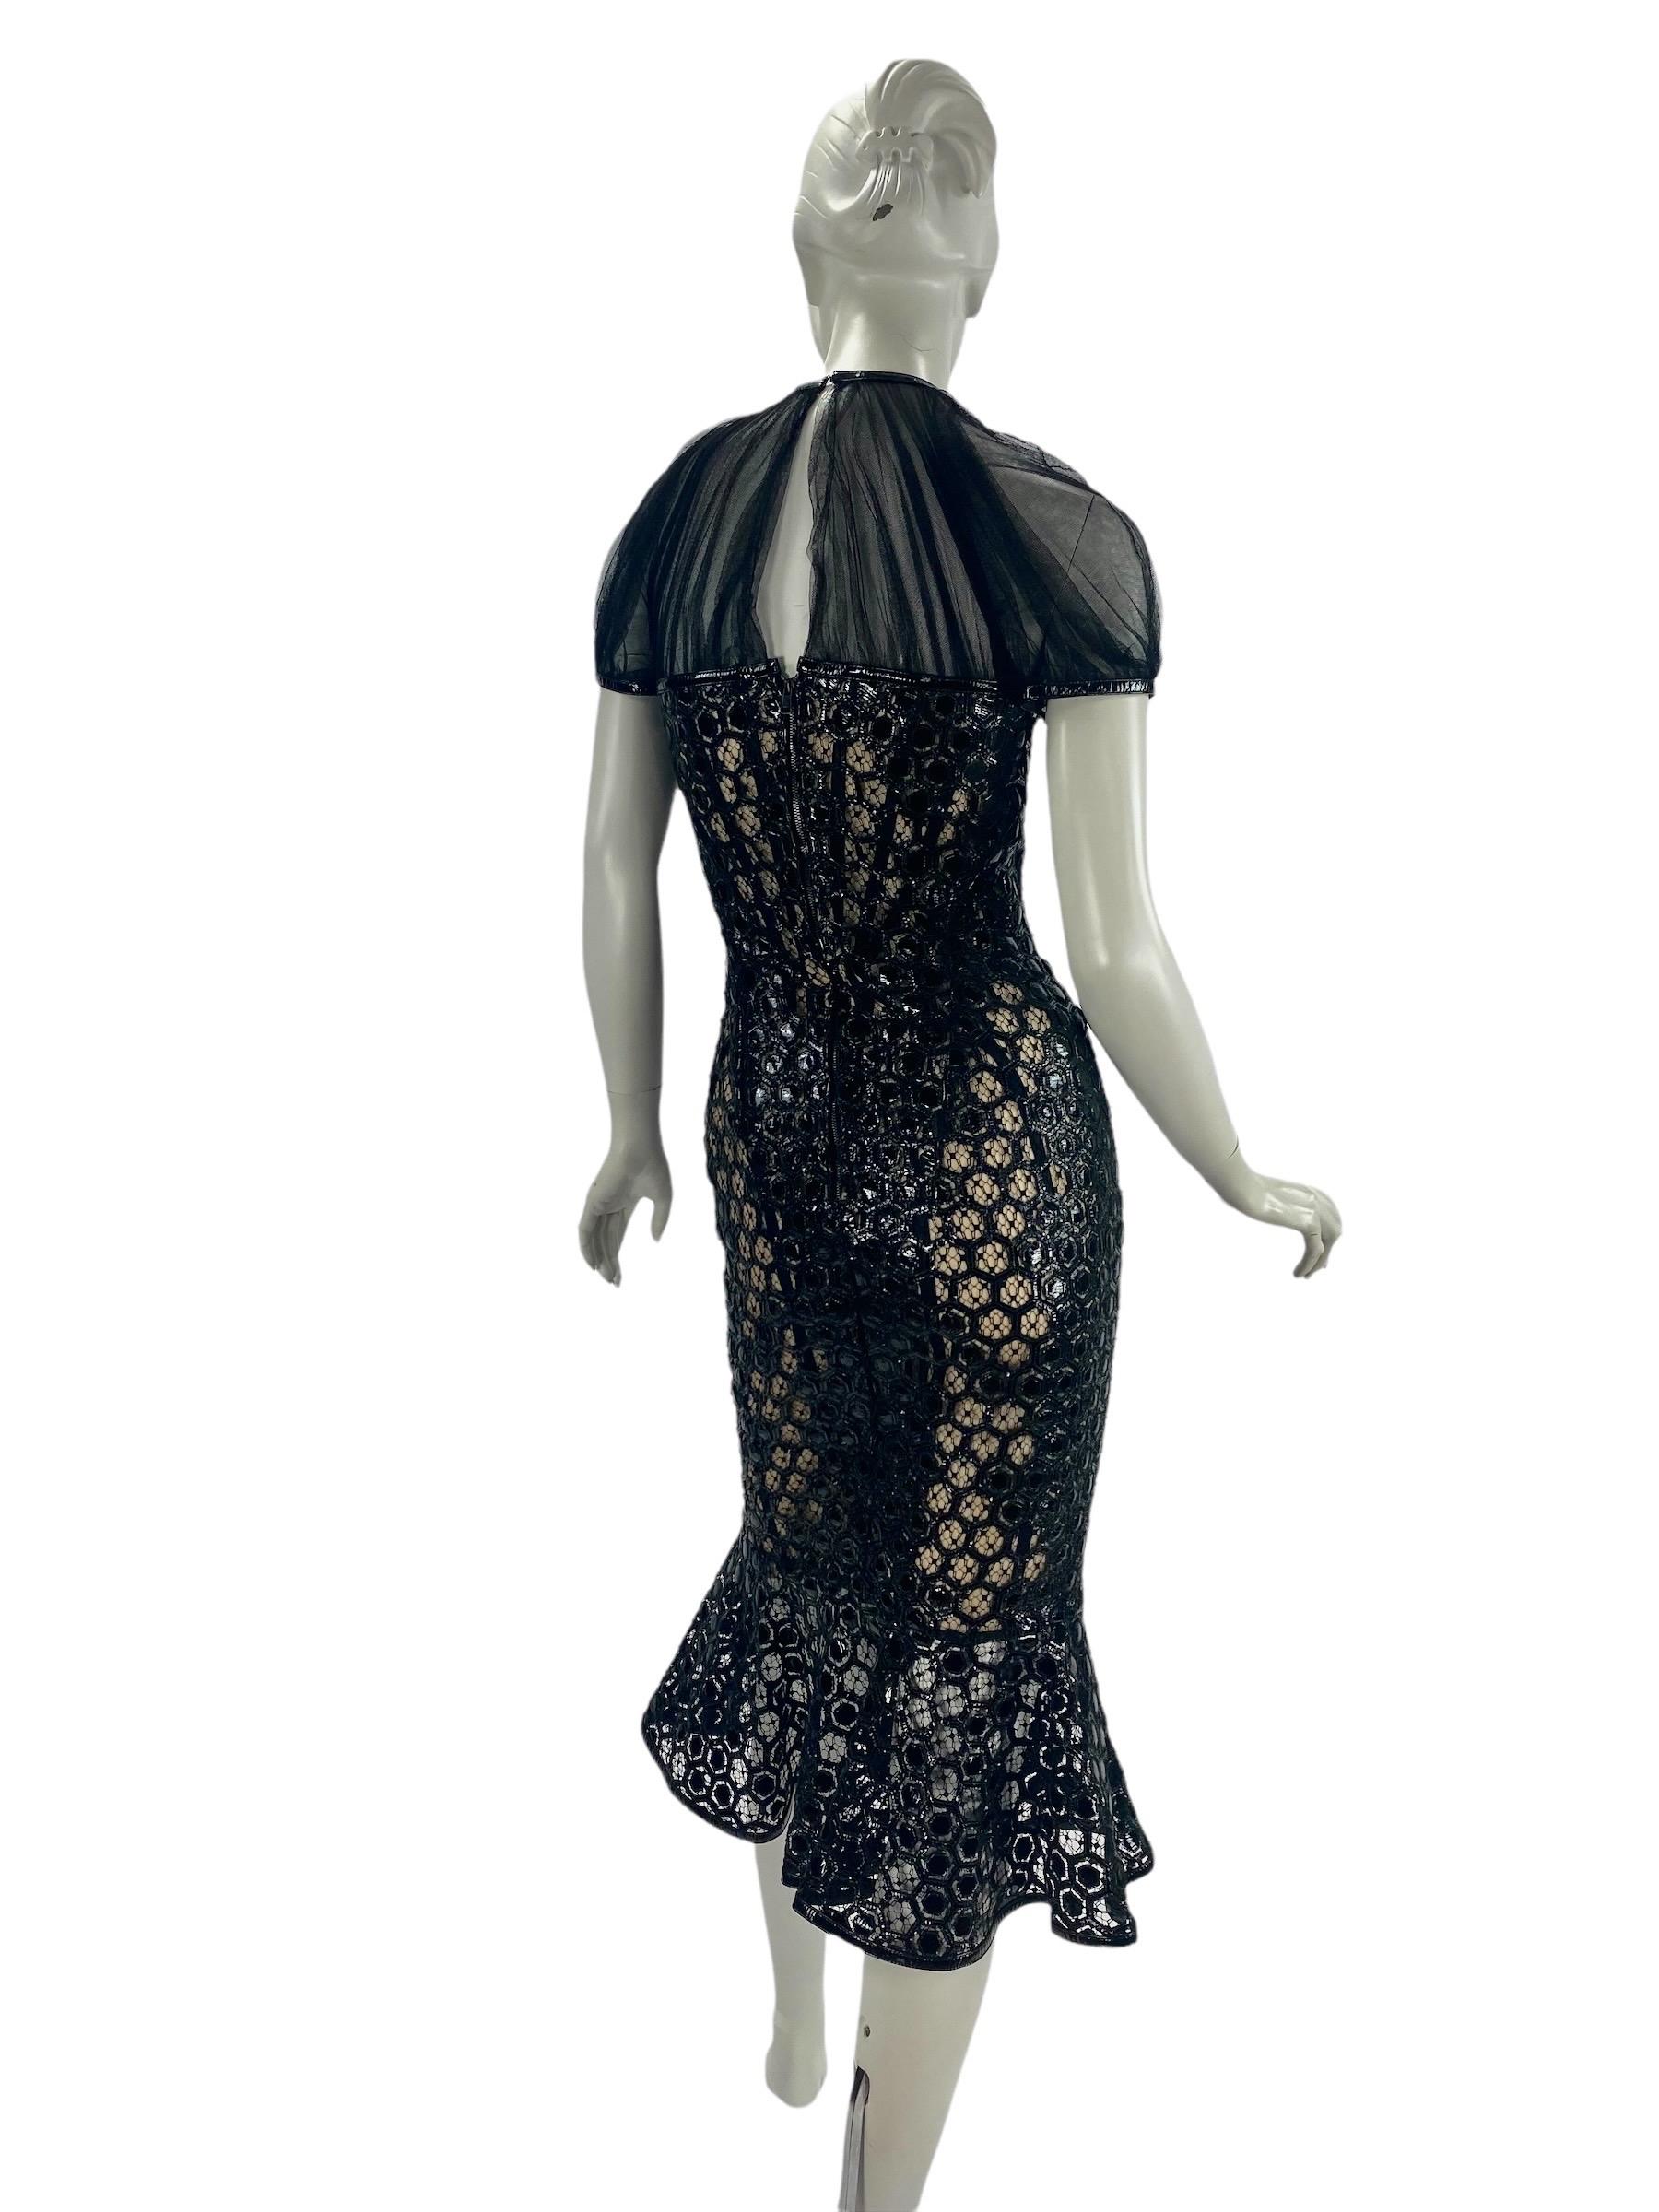 ALEXANDER McQUEEN Black Honeycomb-effect Patent-Leather & Tulle Corset Dress 38 For Sale 3